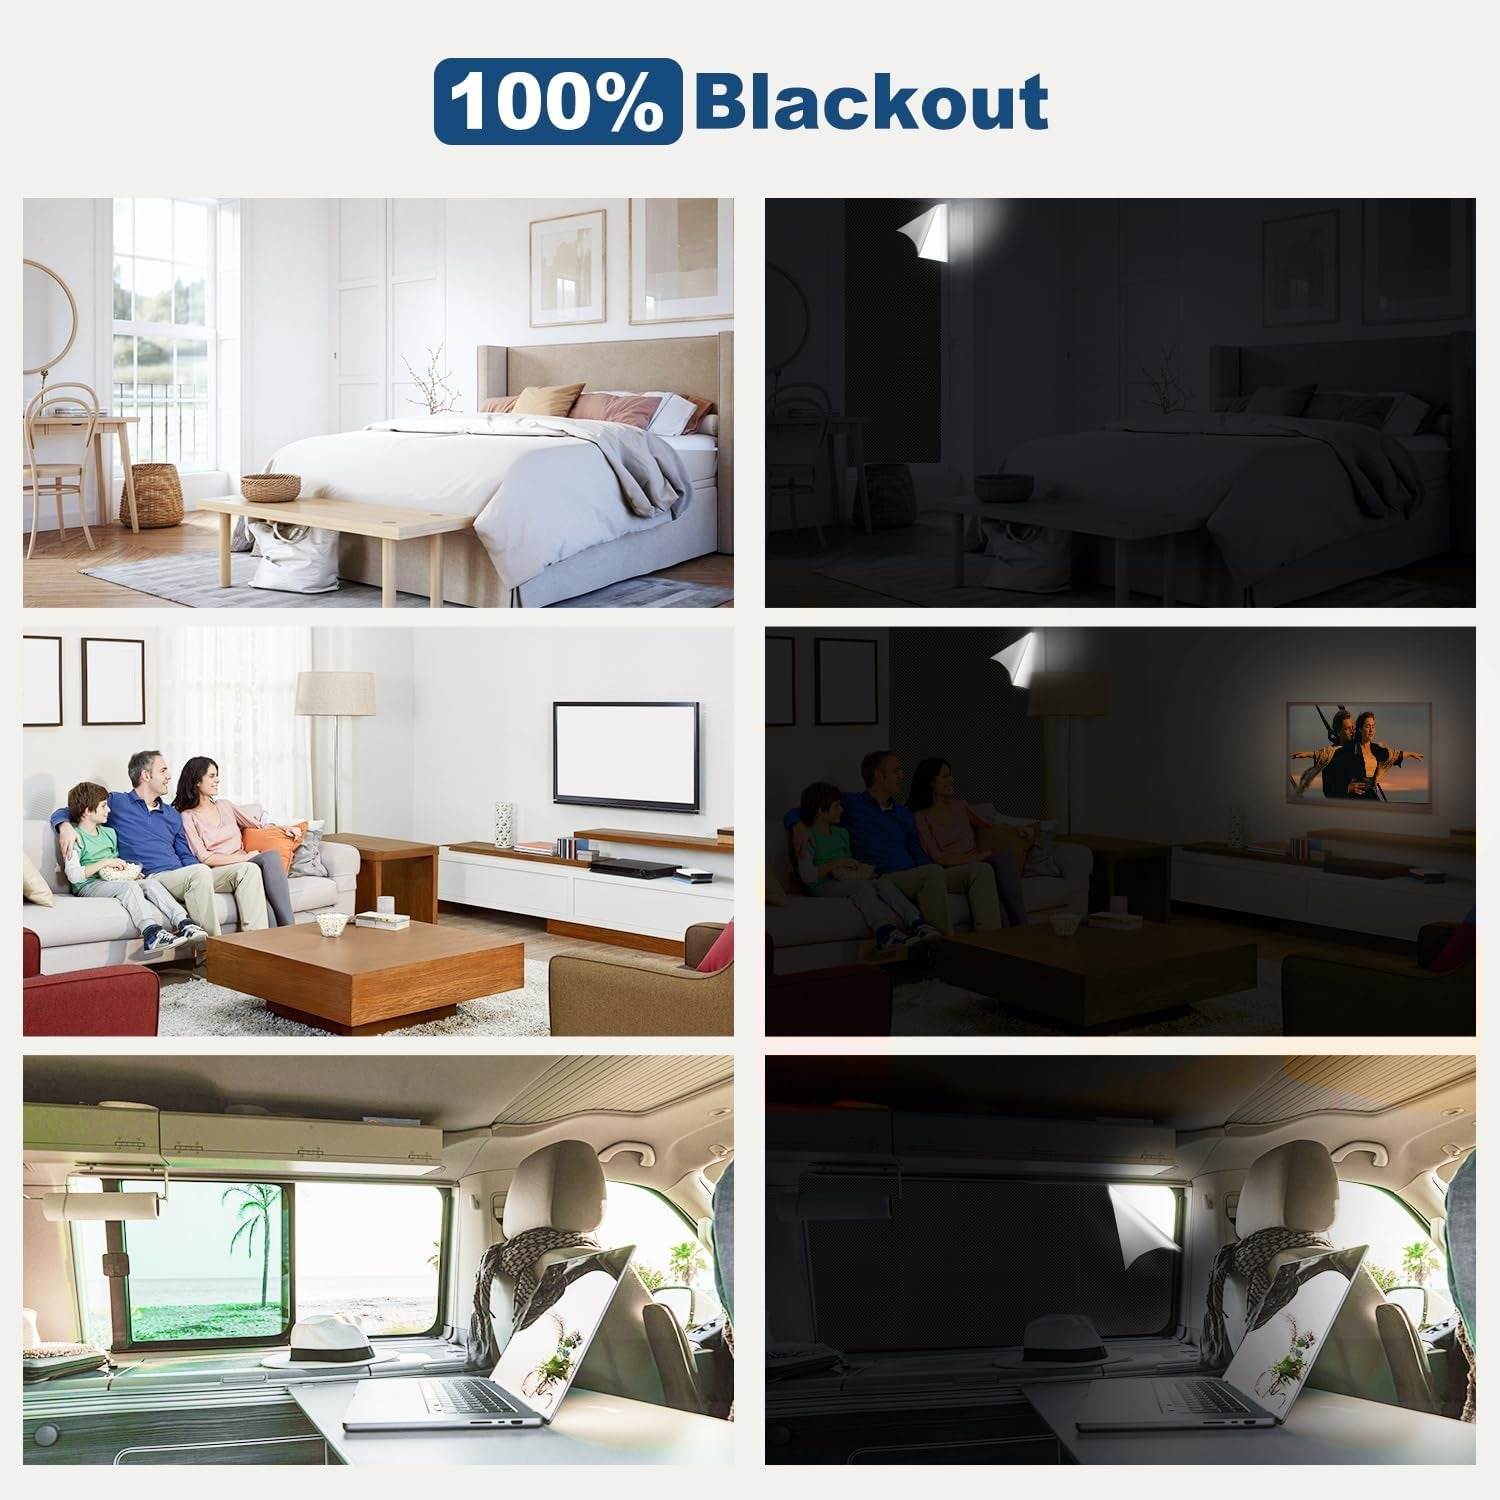 100% Blackout Blinds Shades, 118" X 57" No Drill Window Shades for Bedroom, Temporary Portable Black Out Curtains Cover Film Window Blinds with Stickers & Tabs for Nursery, Dorm, Travel, Office